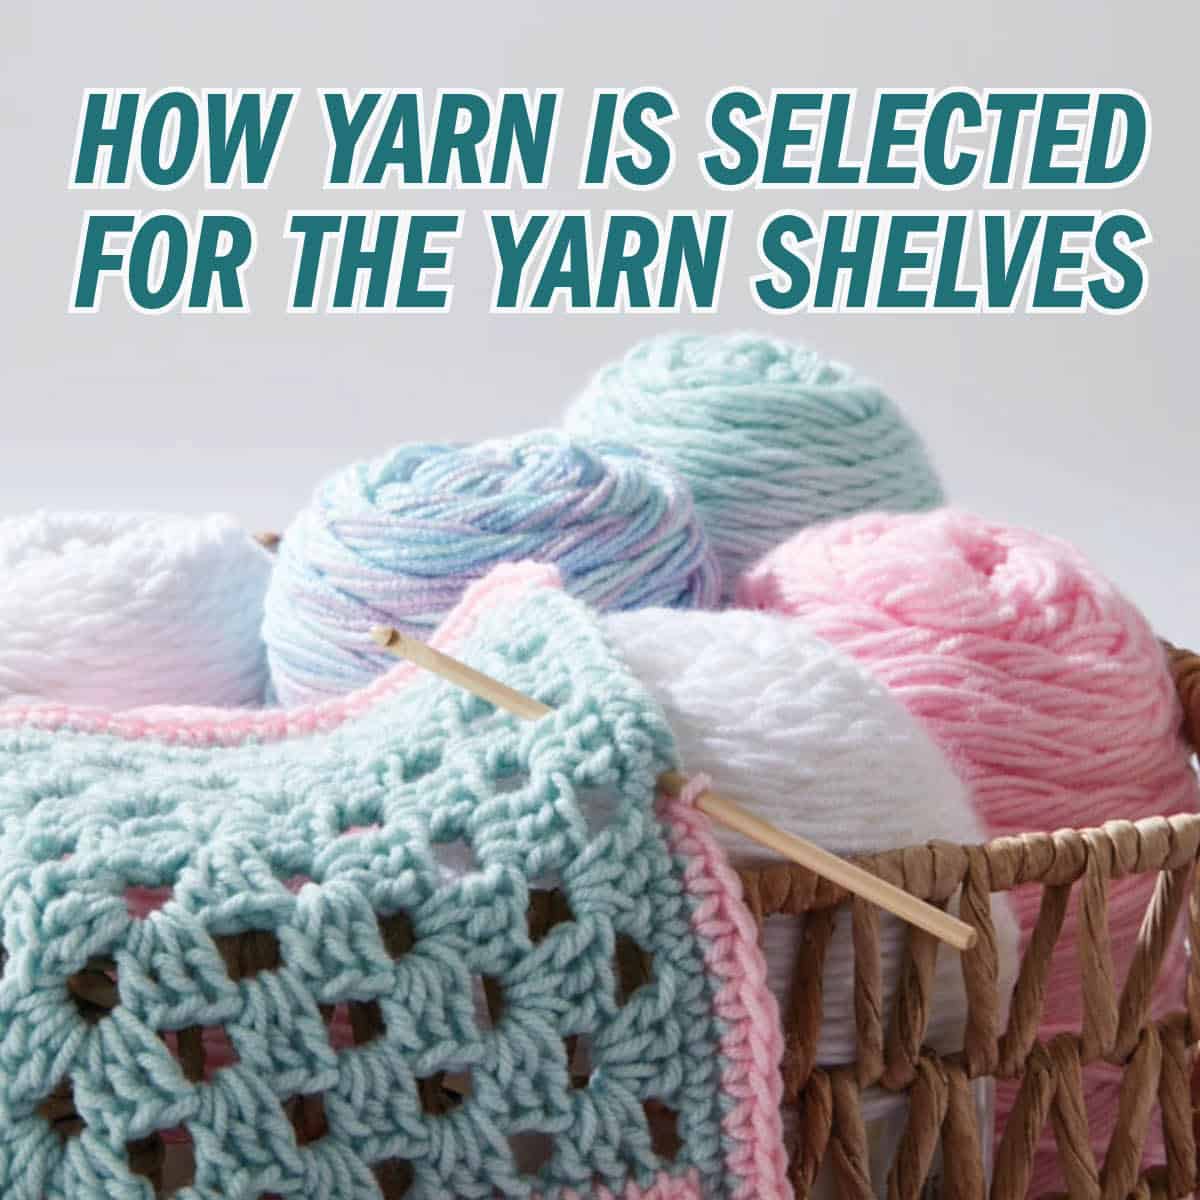 How Yarn is Selected For the Yarn Shelves